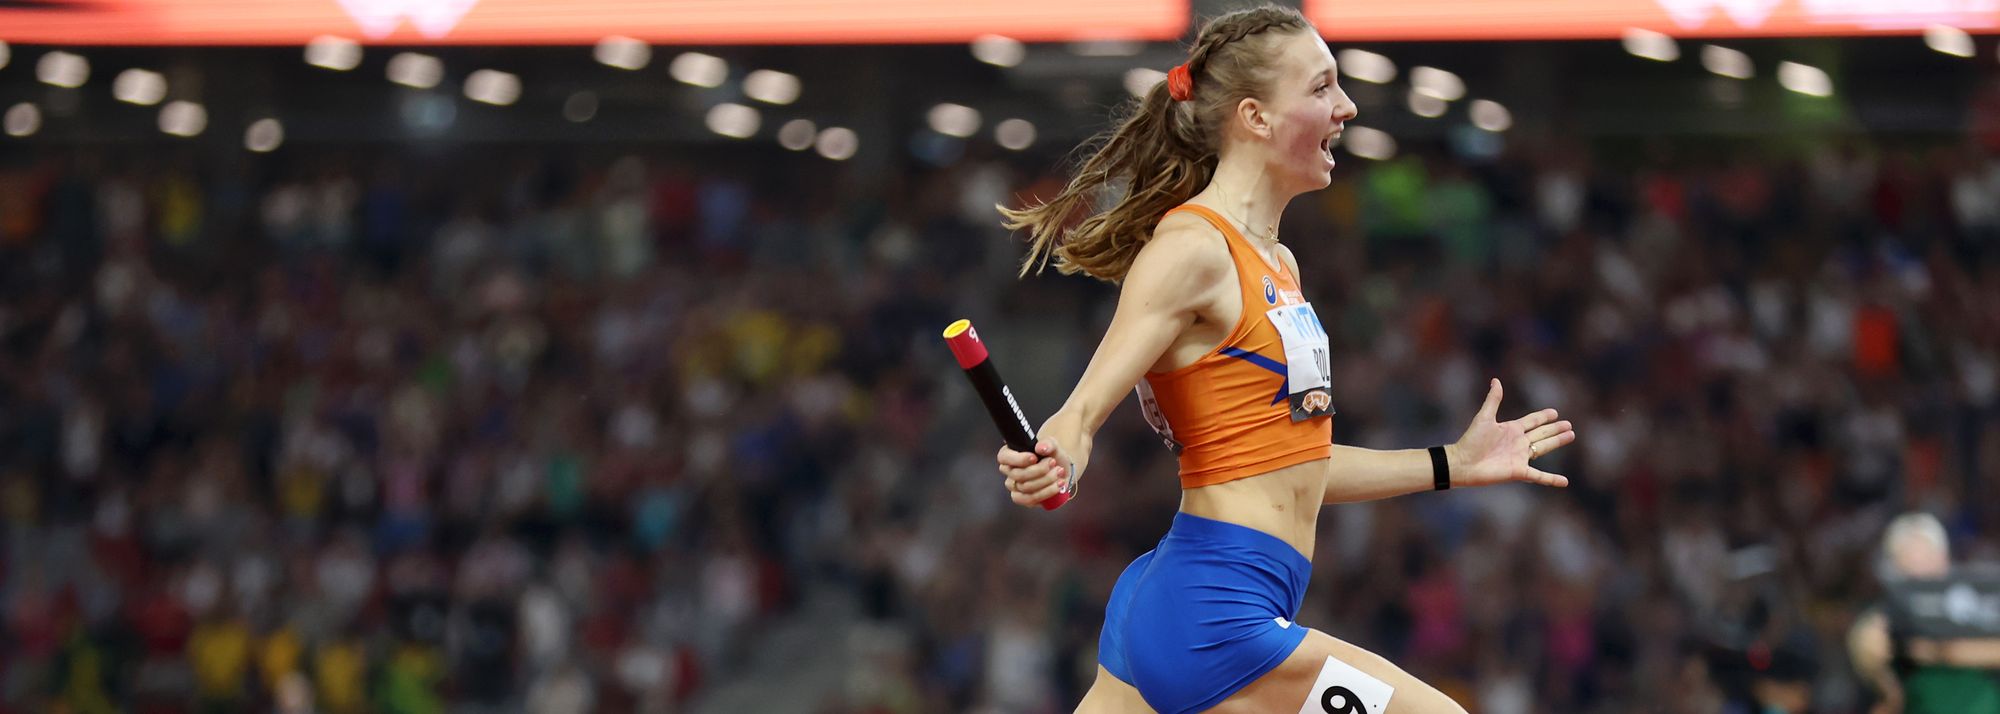 In the end, it was left to Femke Bol to bring down the curtain on the wonderful World Athletics Championships Budapest 23. In fittingly show-stopping style.